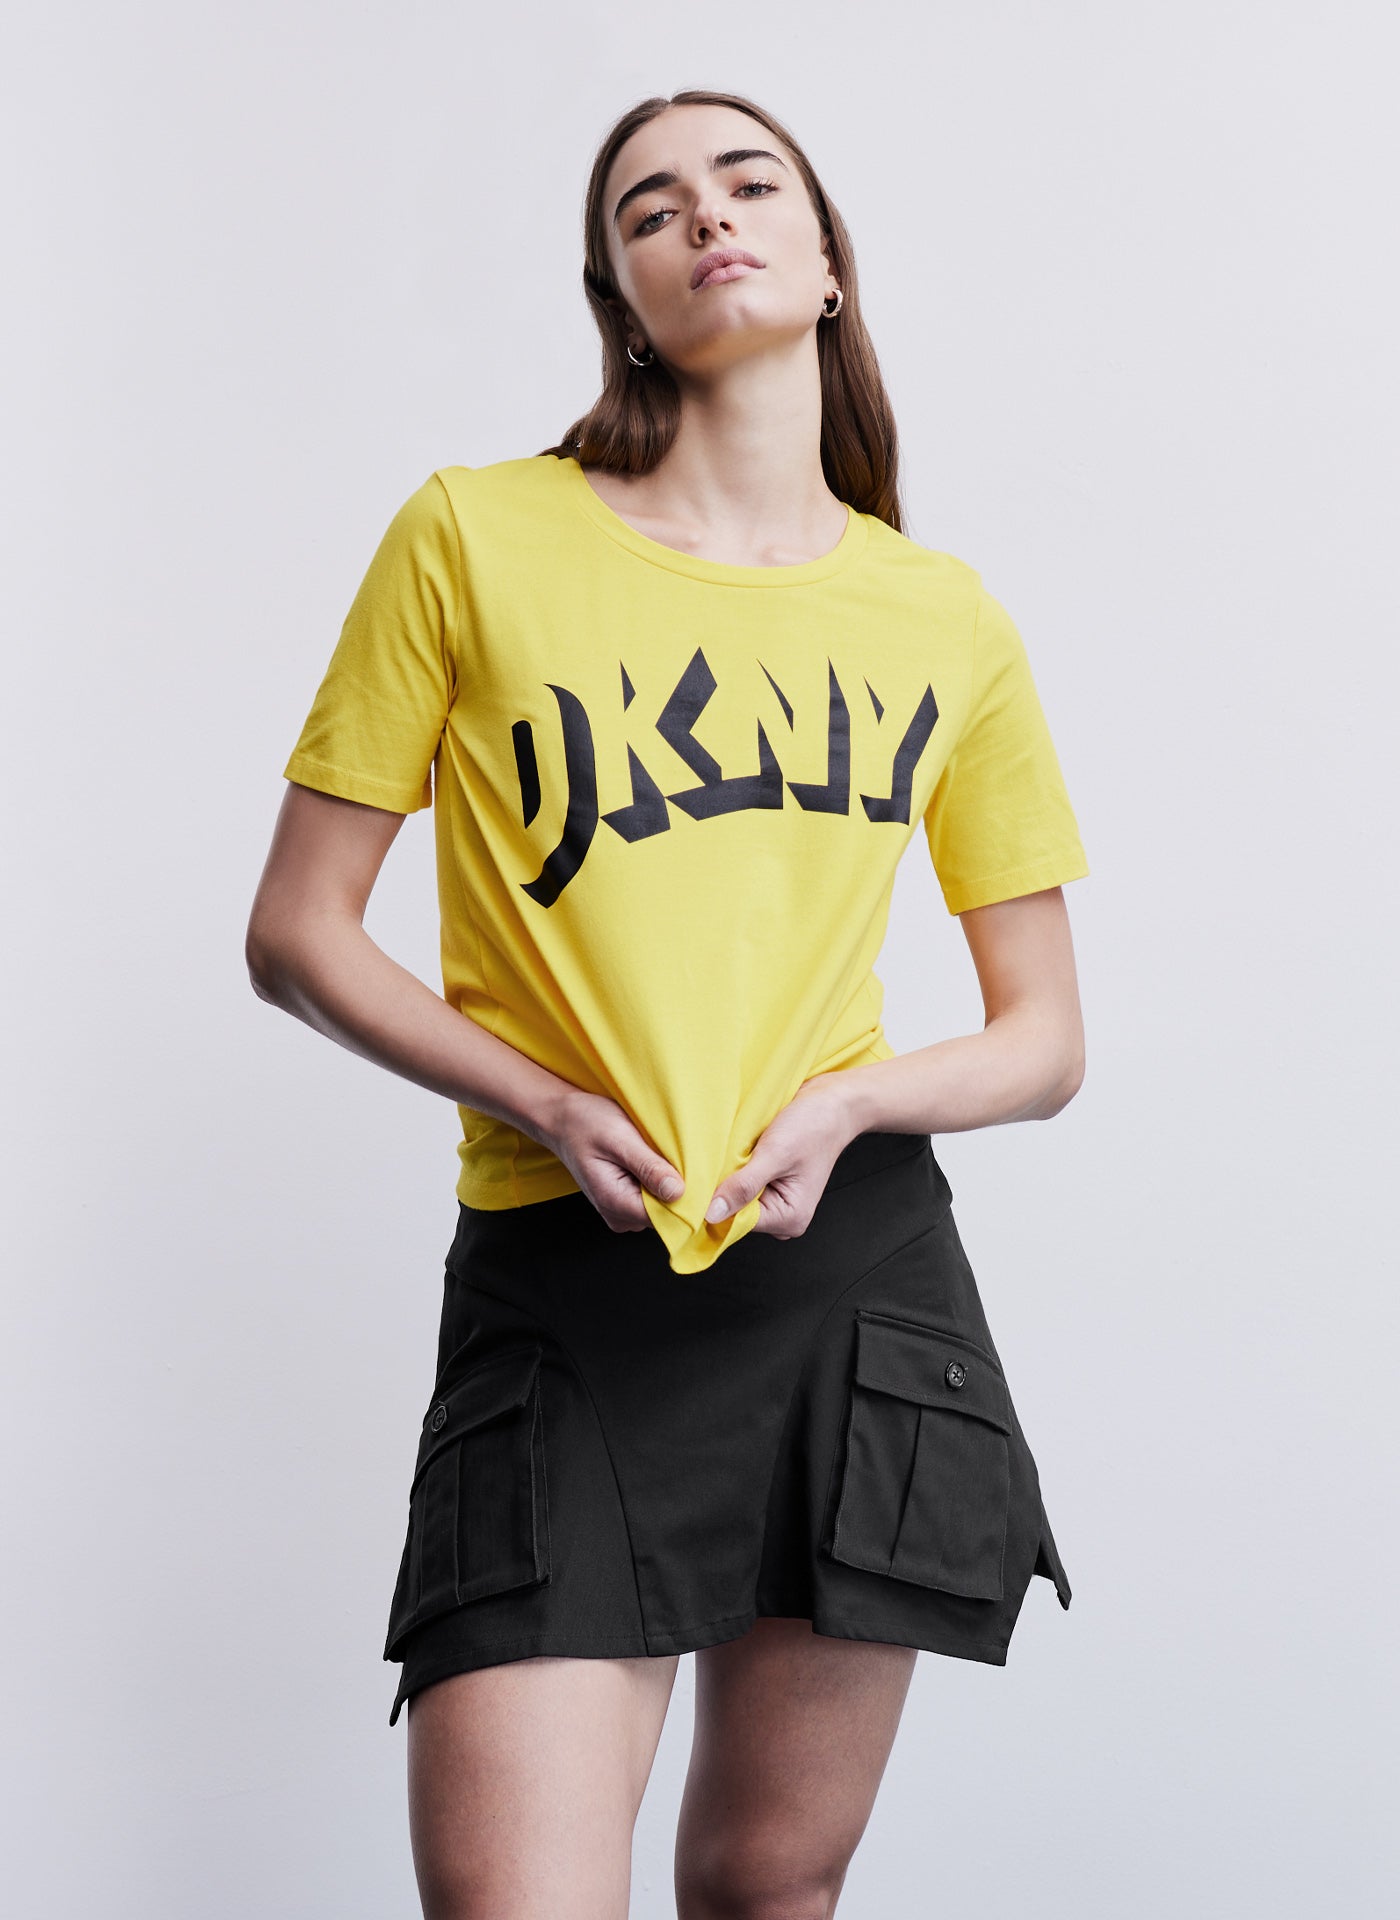 DKNY 451209 Signature Lace T-Shirt Perfect Coverage